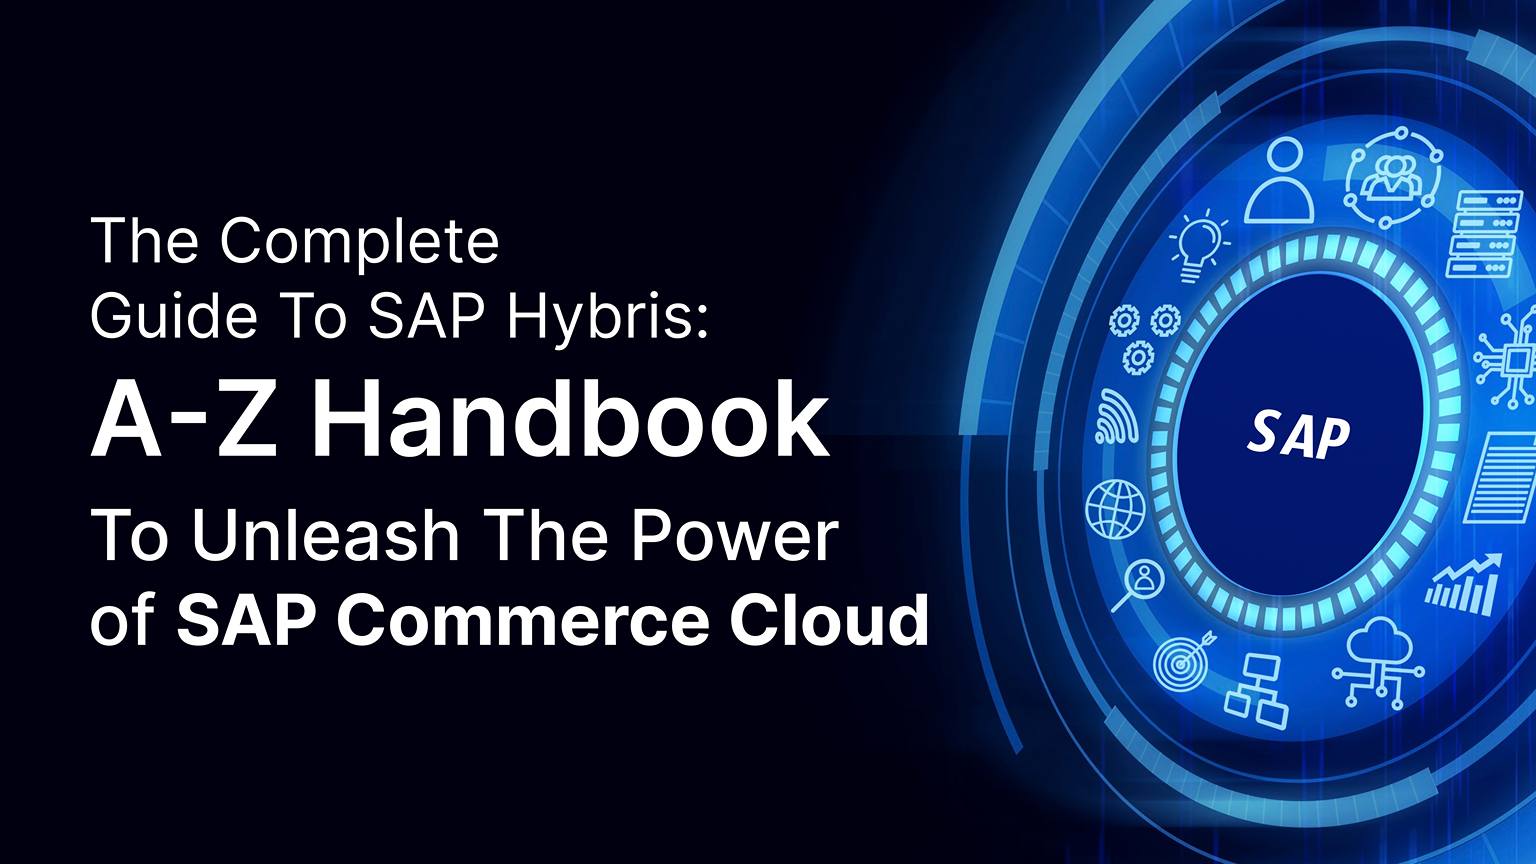 The Complete Guide To SAP Hybris